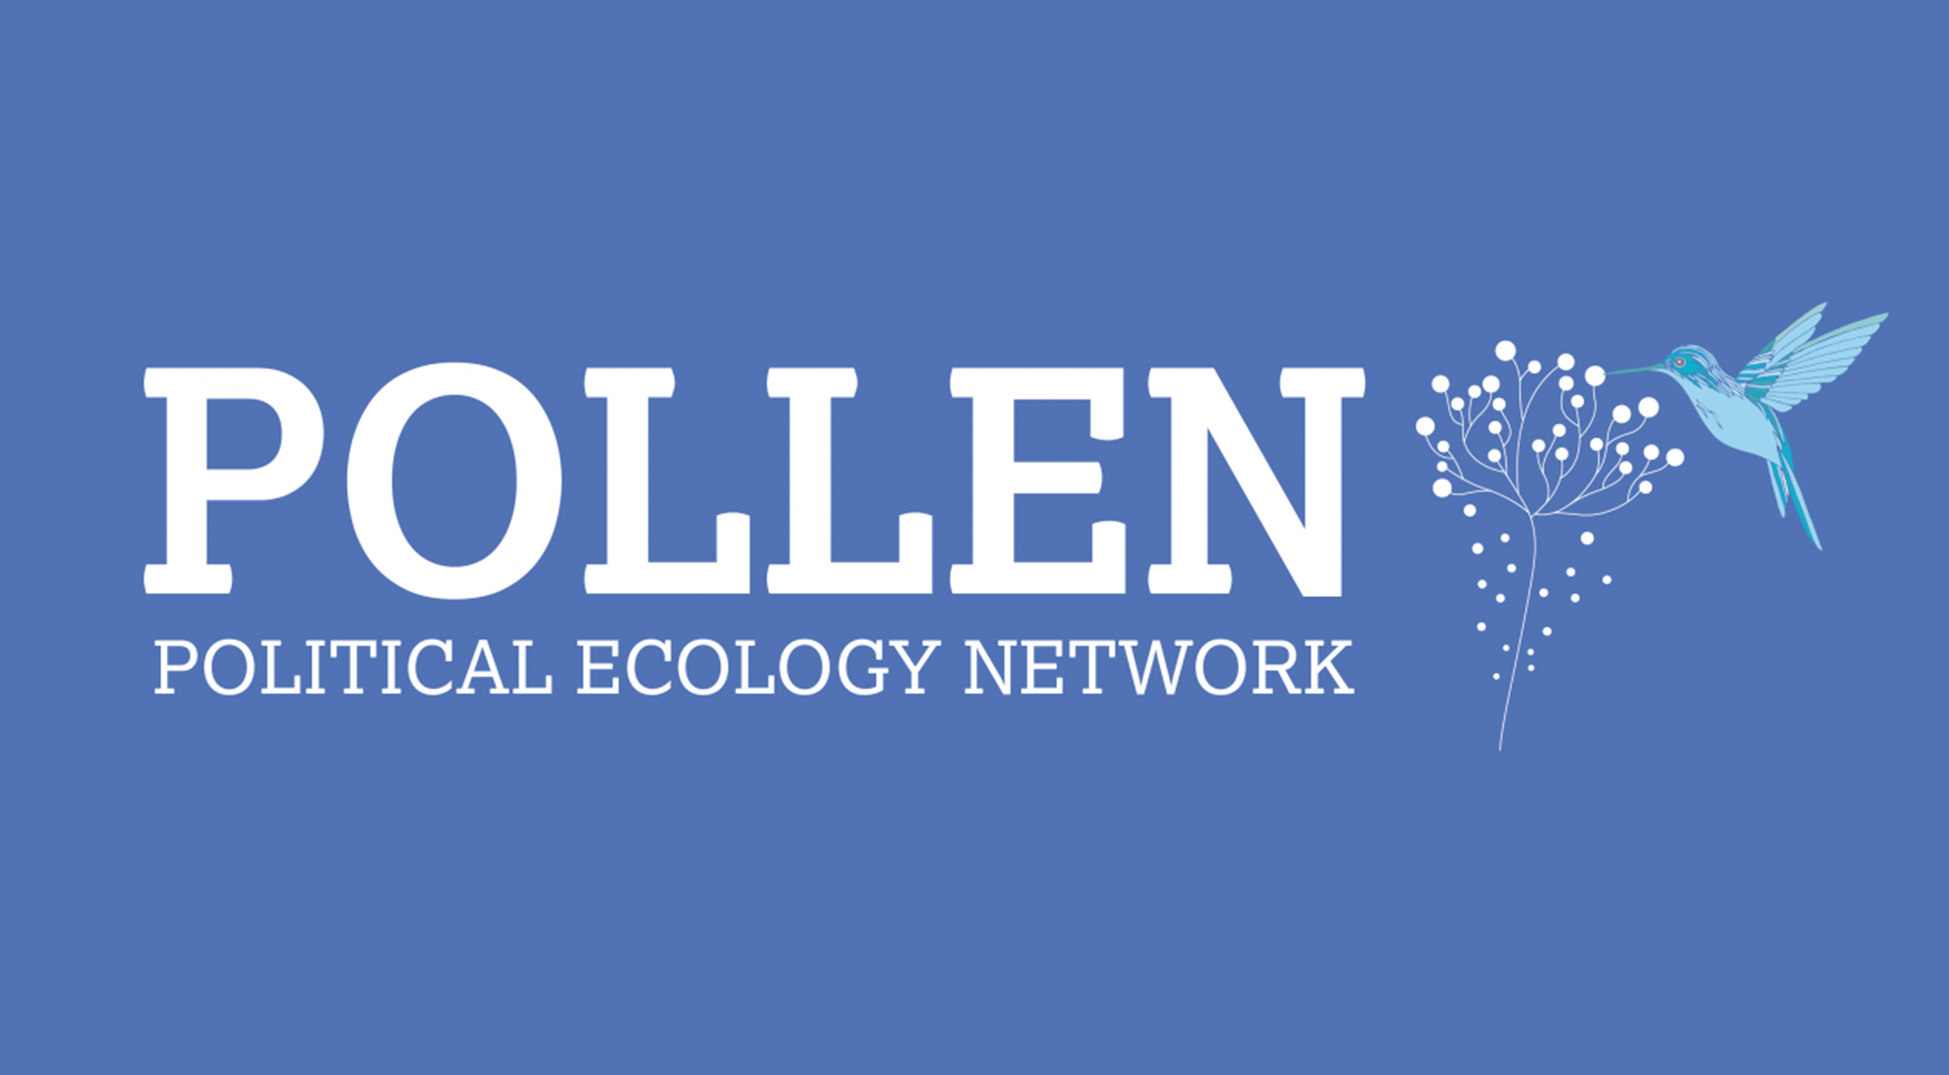 The ENT Foundation joins the POLLEN international network of political ecology